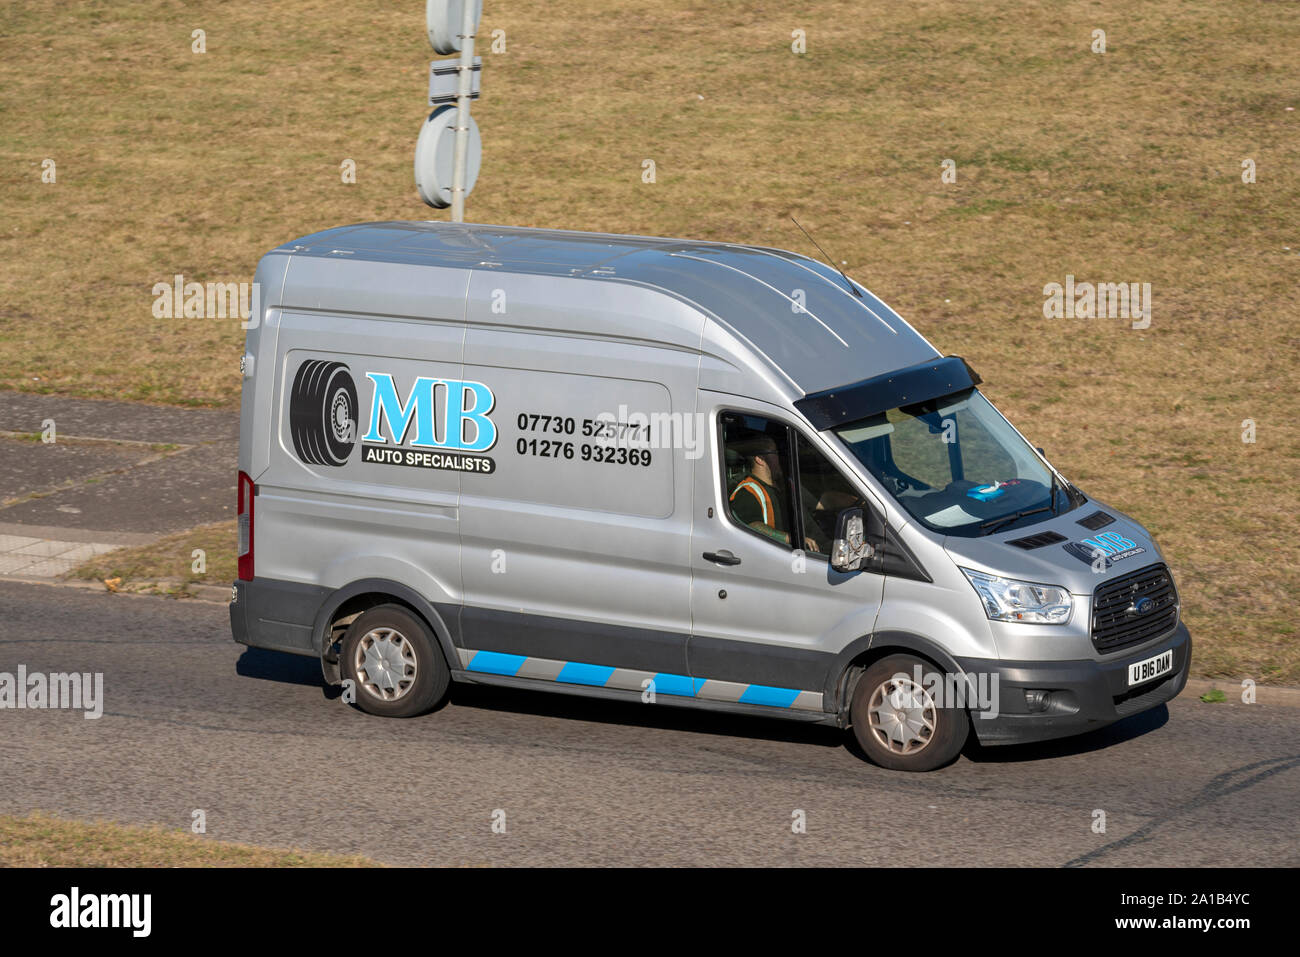 MB Auto Specialists vehicle Ford Transit van driving on the road near Heathrow, London, UK. Transport and logistics company. Space for copy Stock Photo